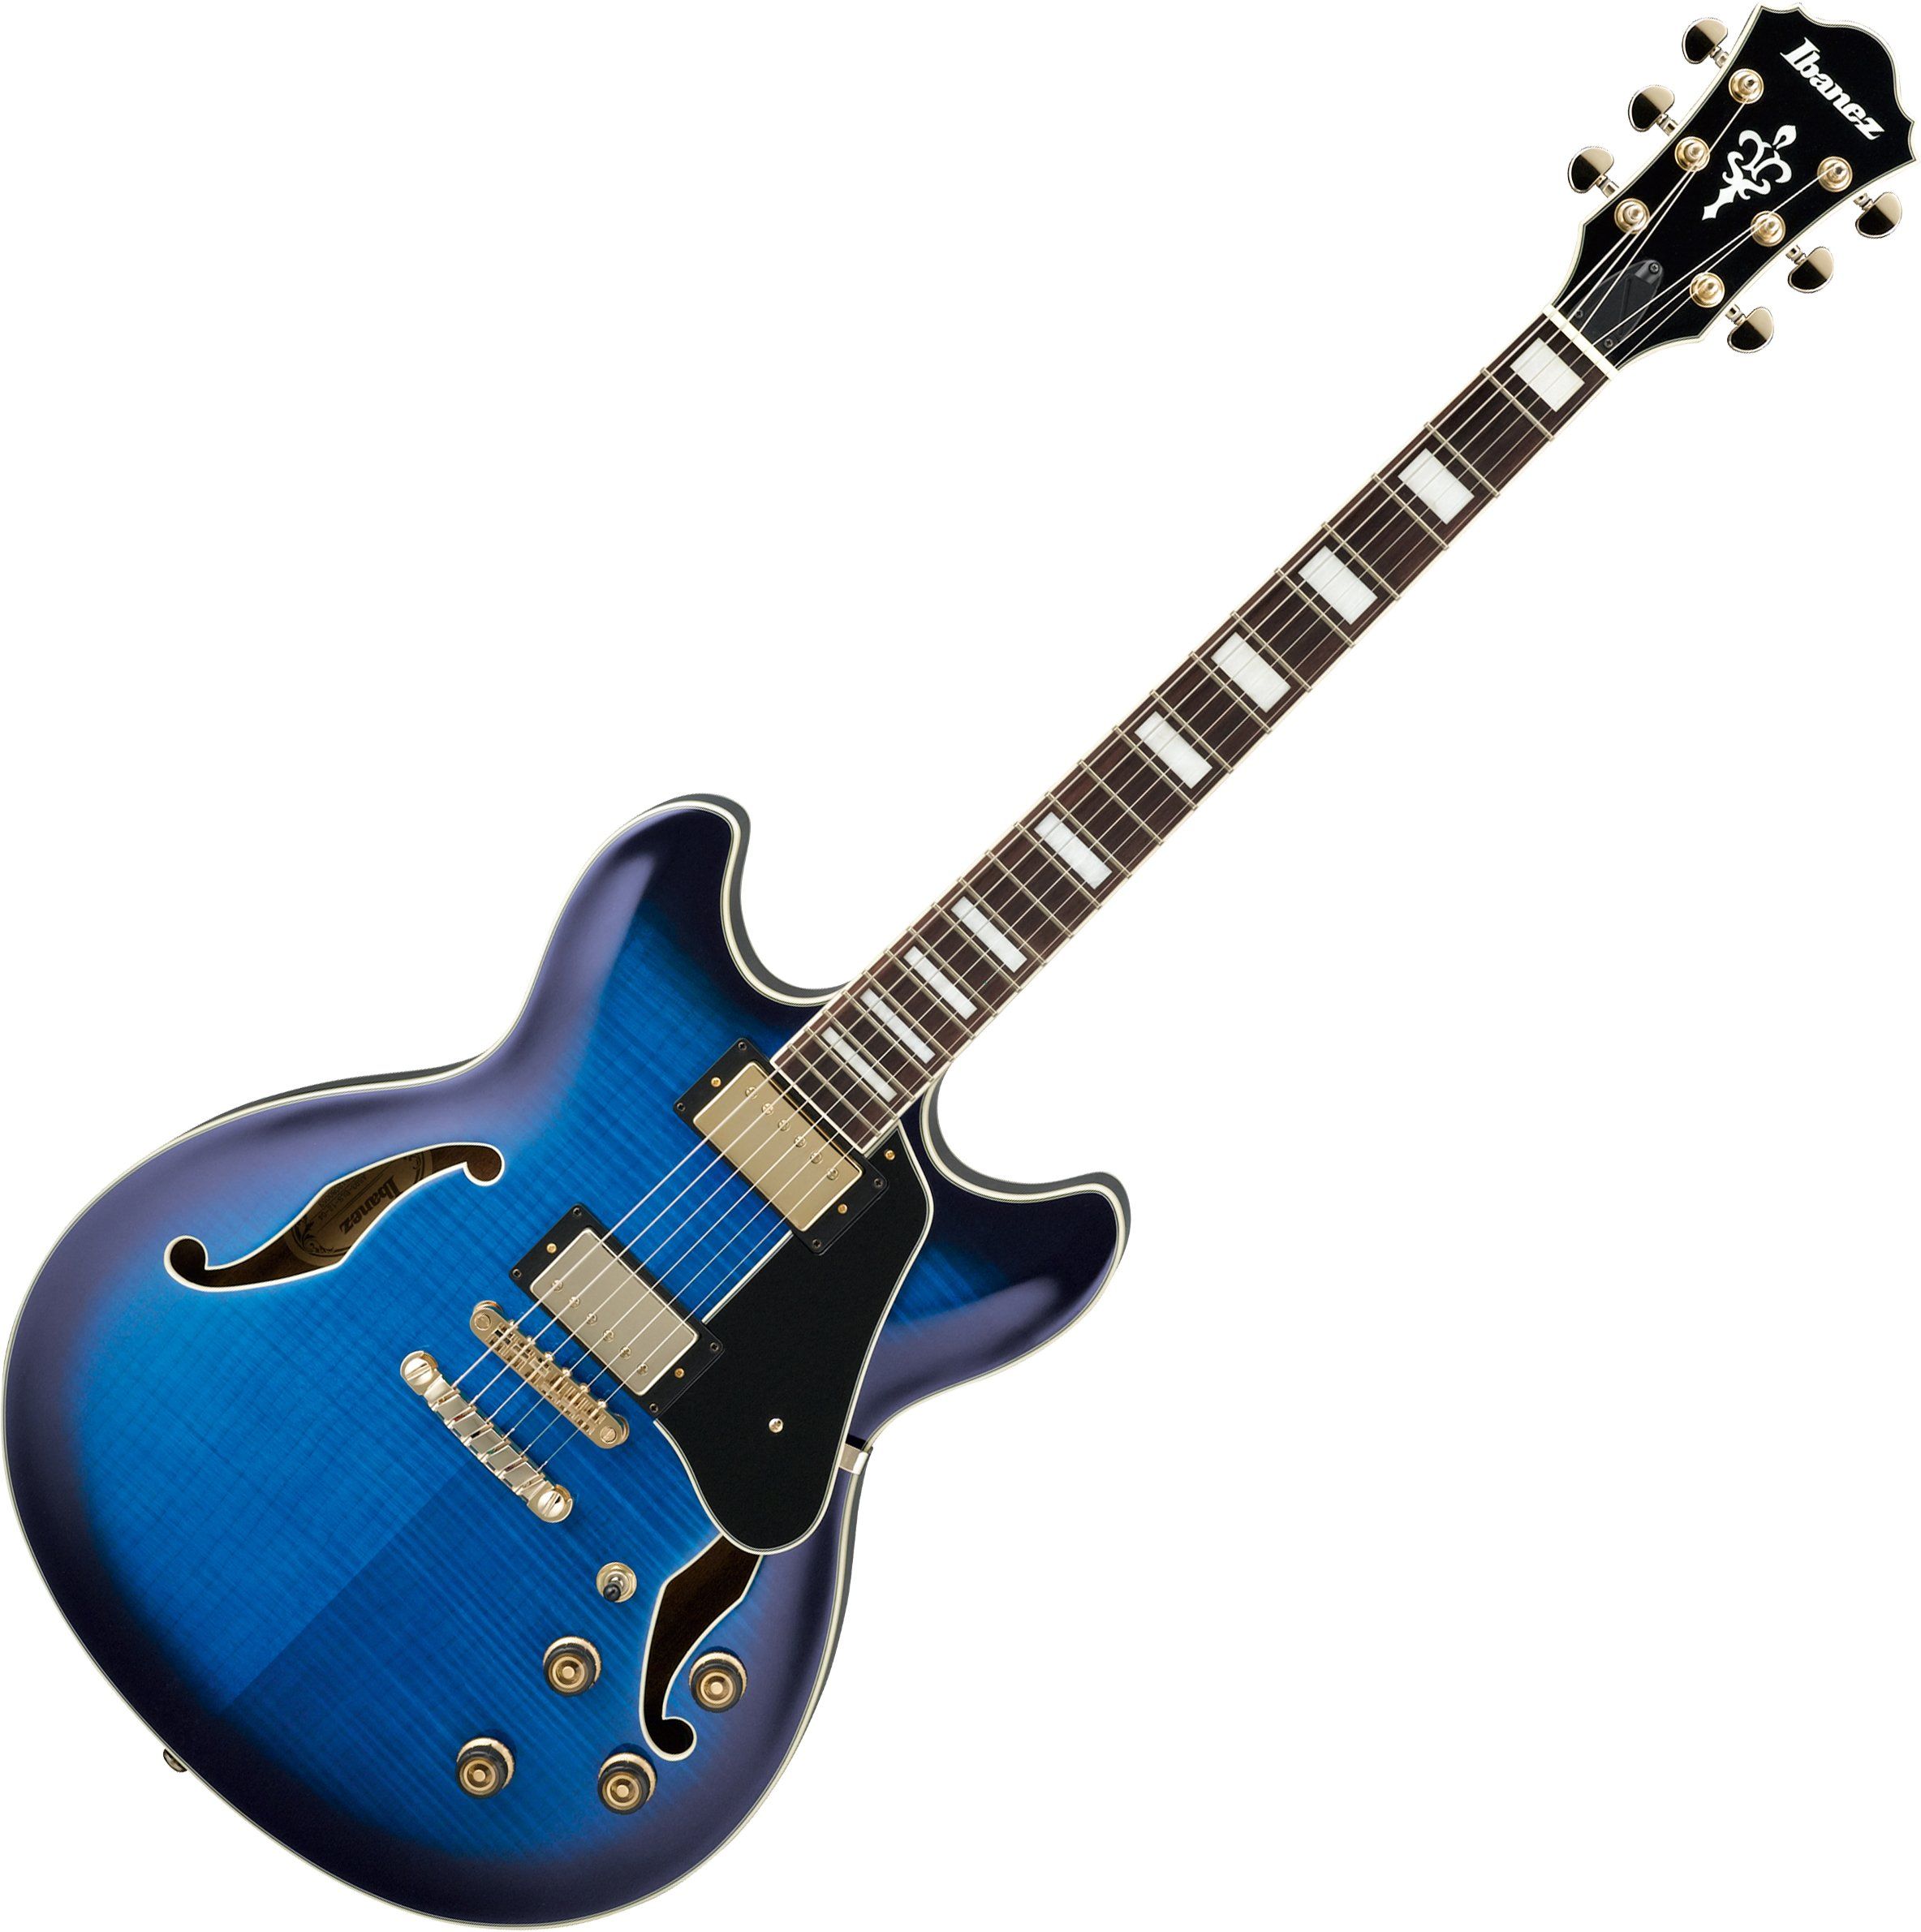 Ibanez Artcore Expressionist AS93 Hollow Body Electric Guitar Blue Sun